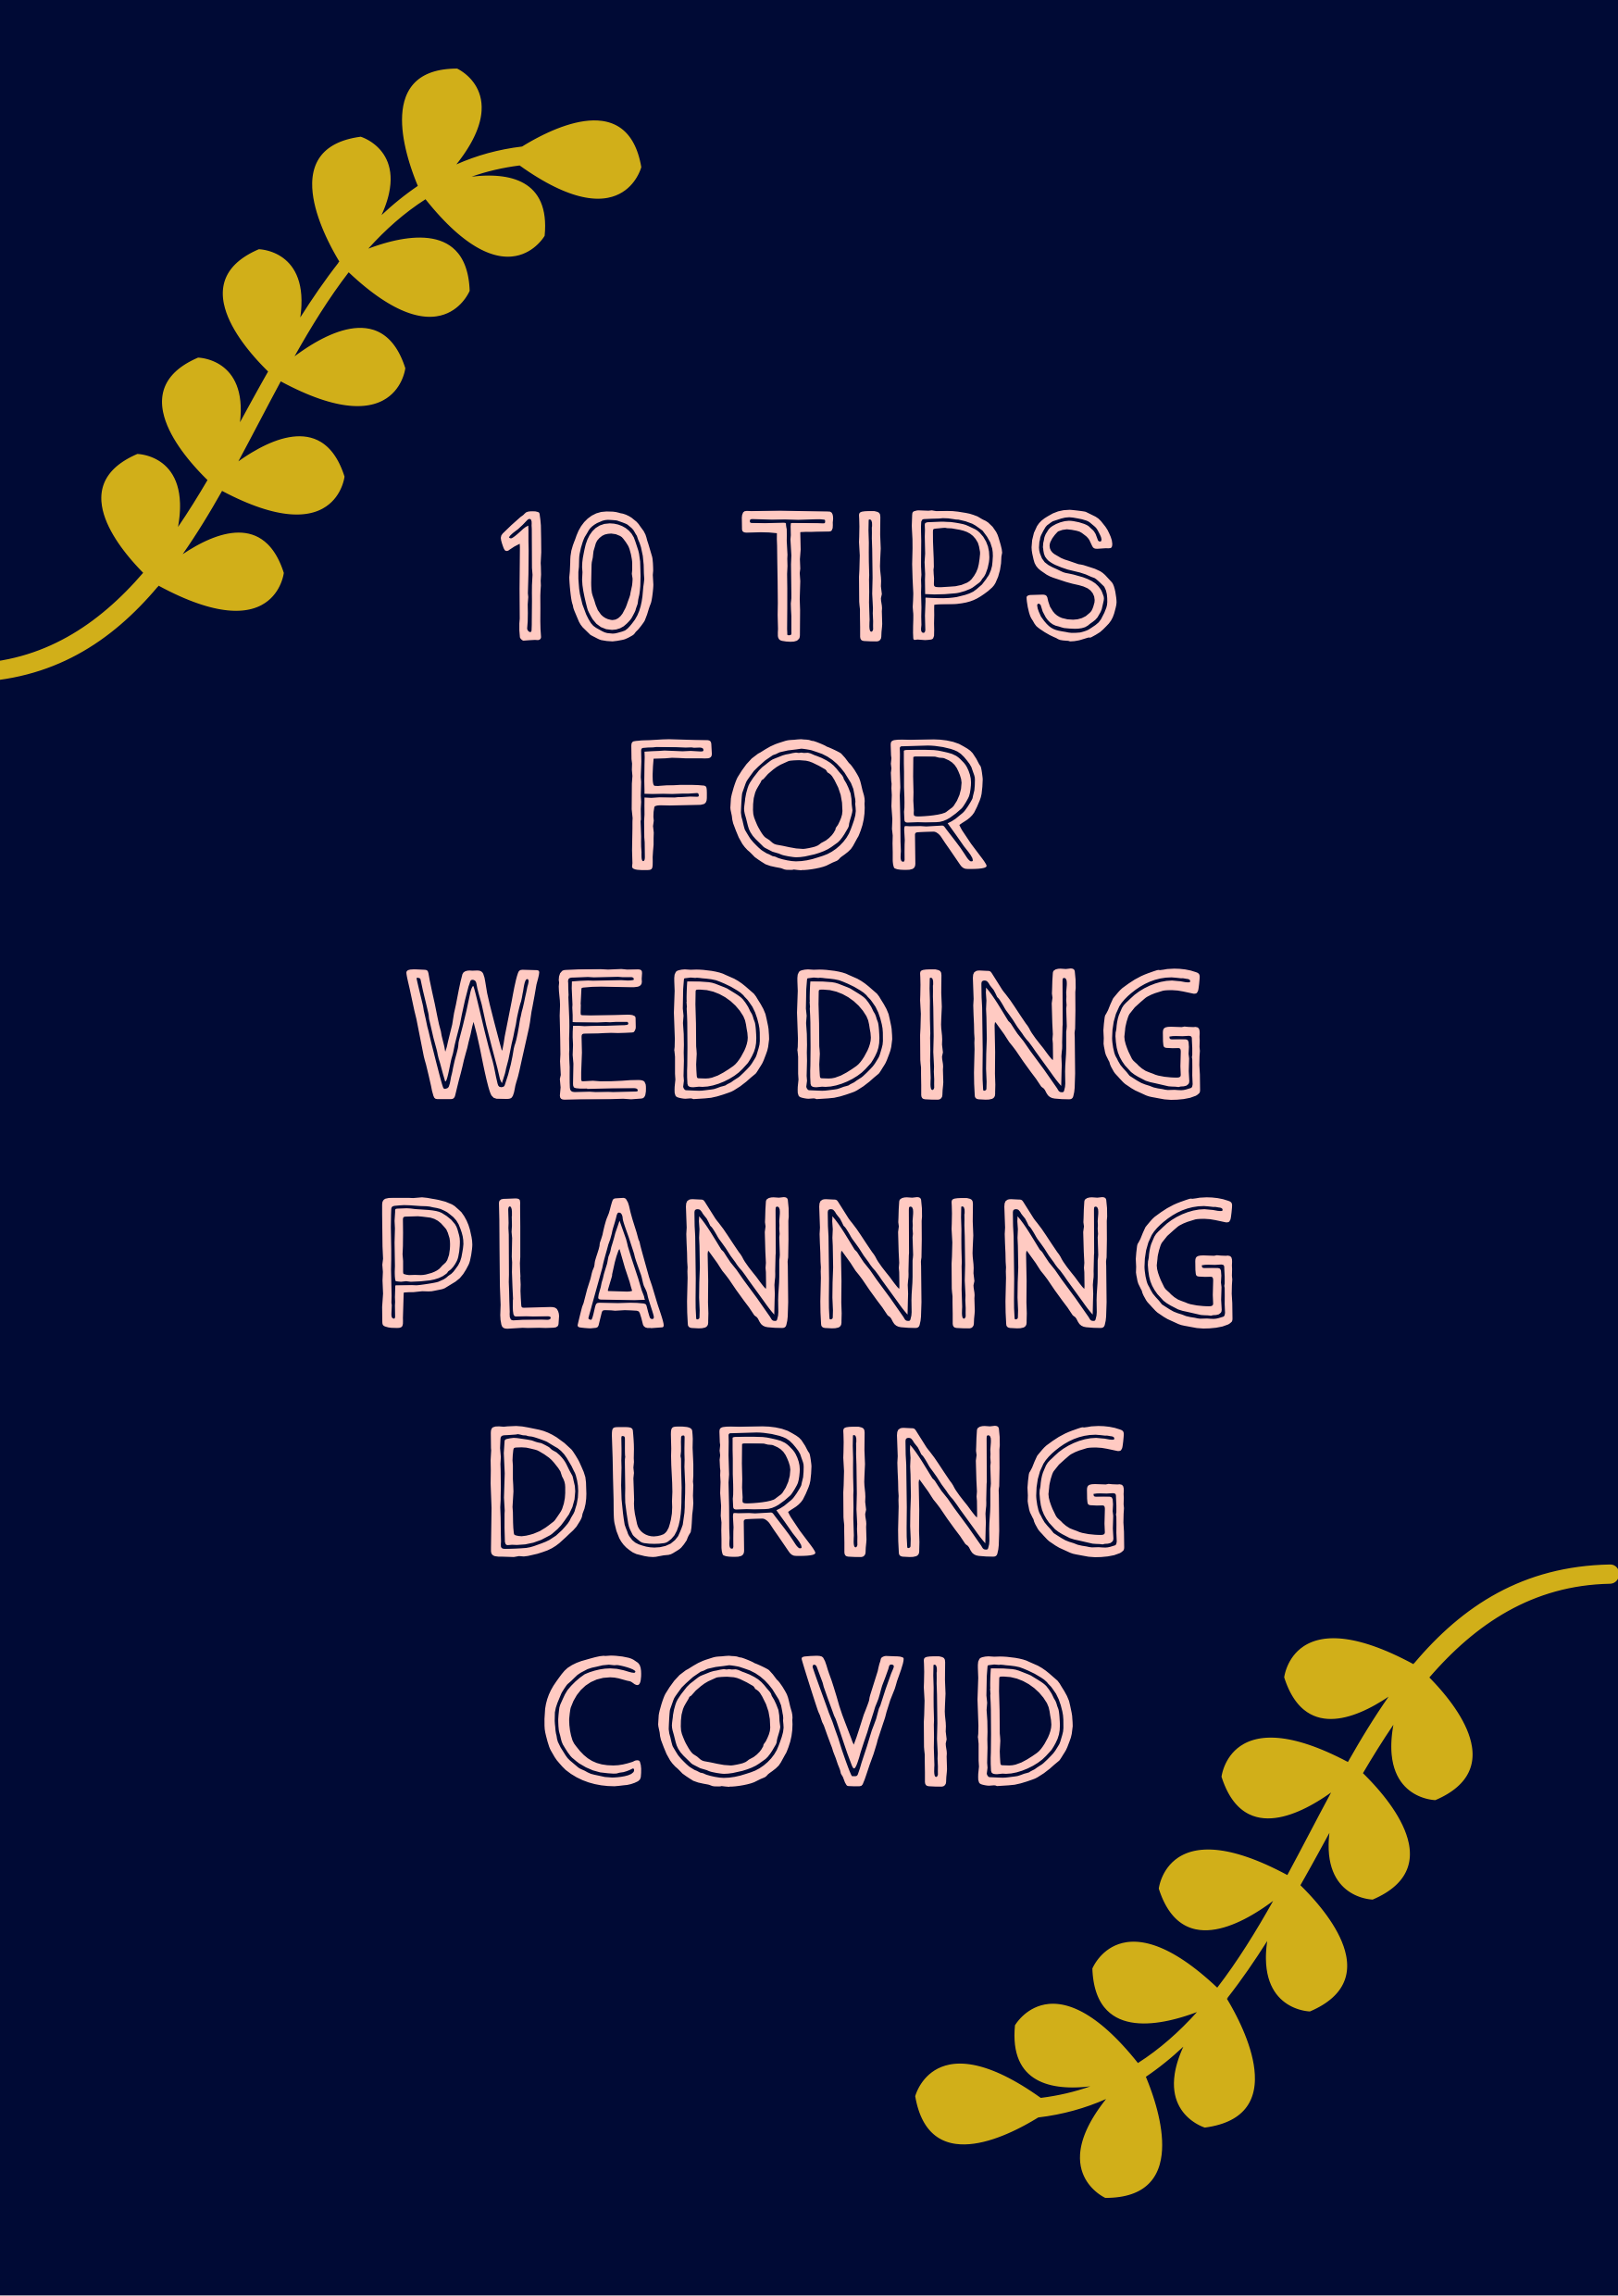 10 Tips for Wedding Planning During Covid